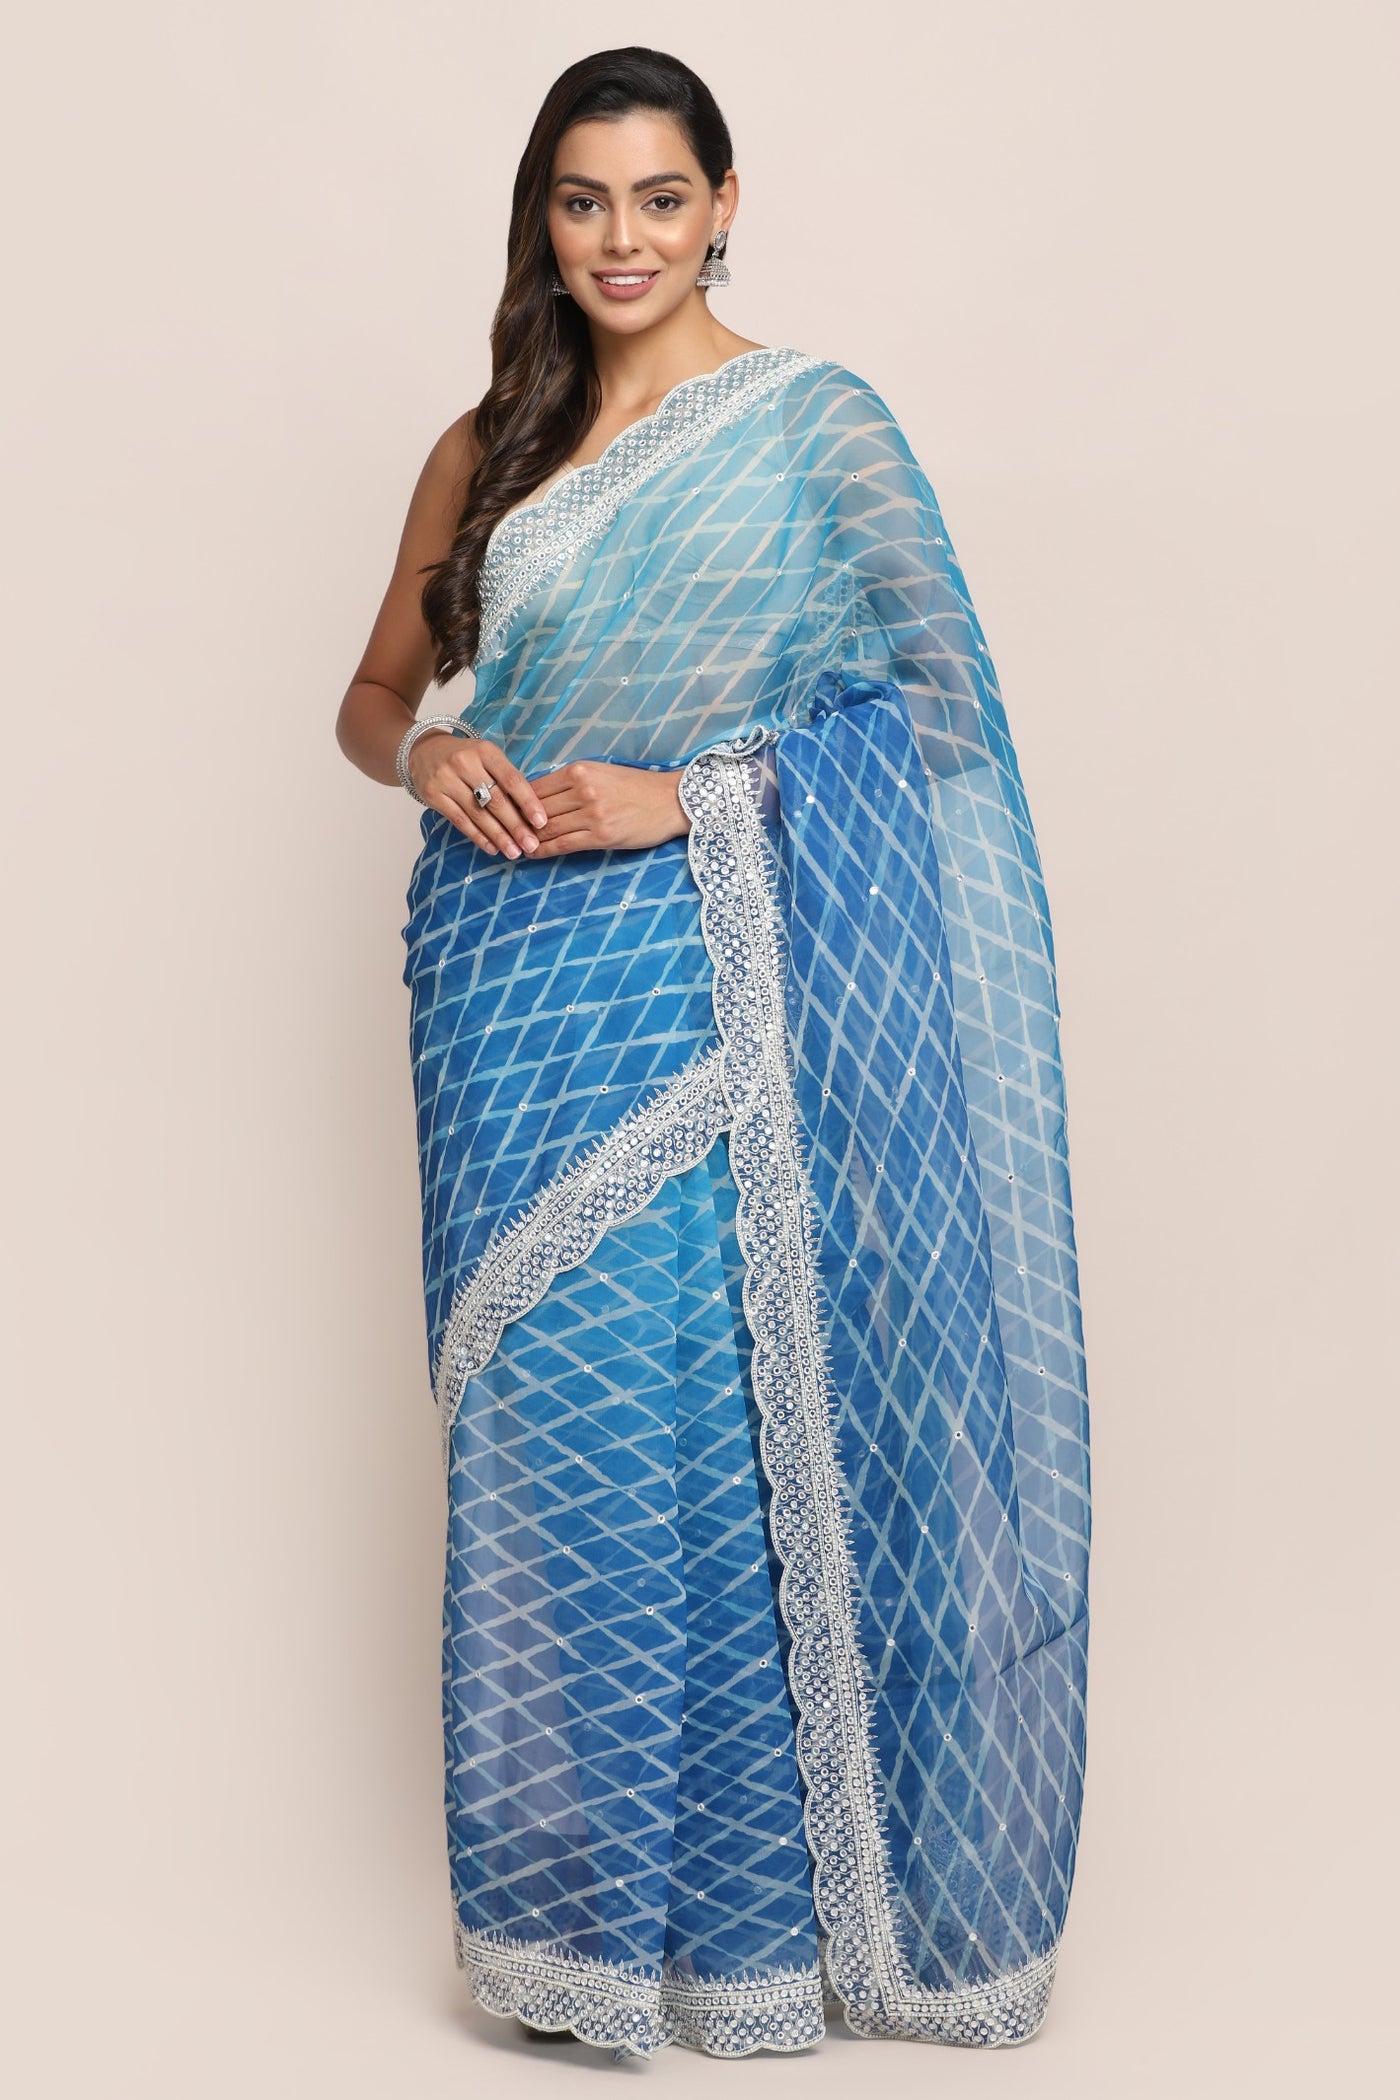 Elegant blue color tie and dyed embroidered saree